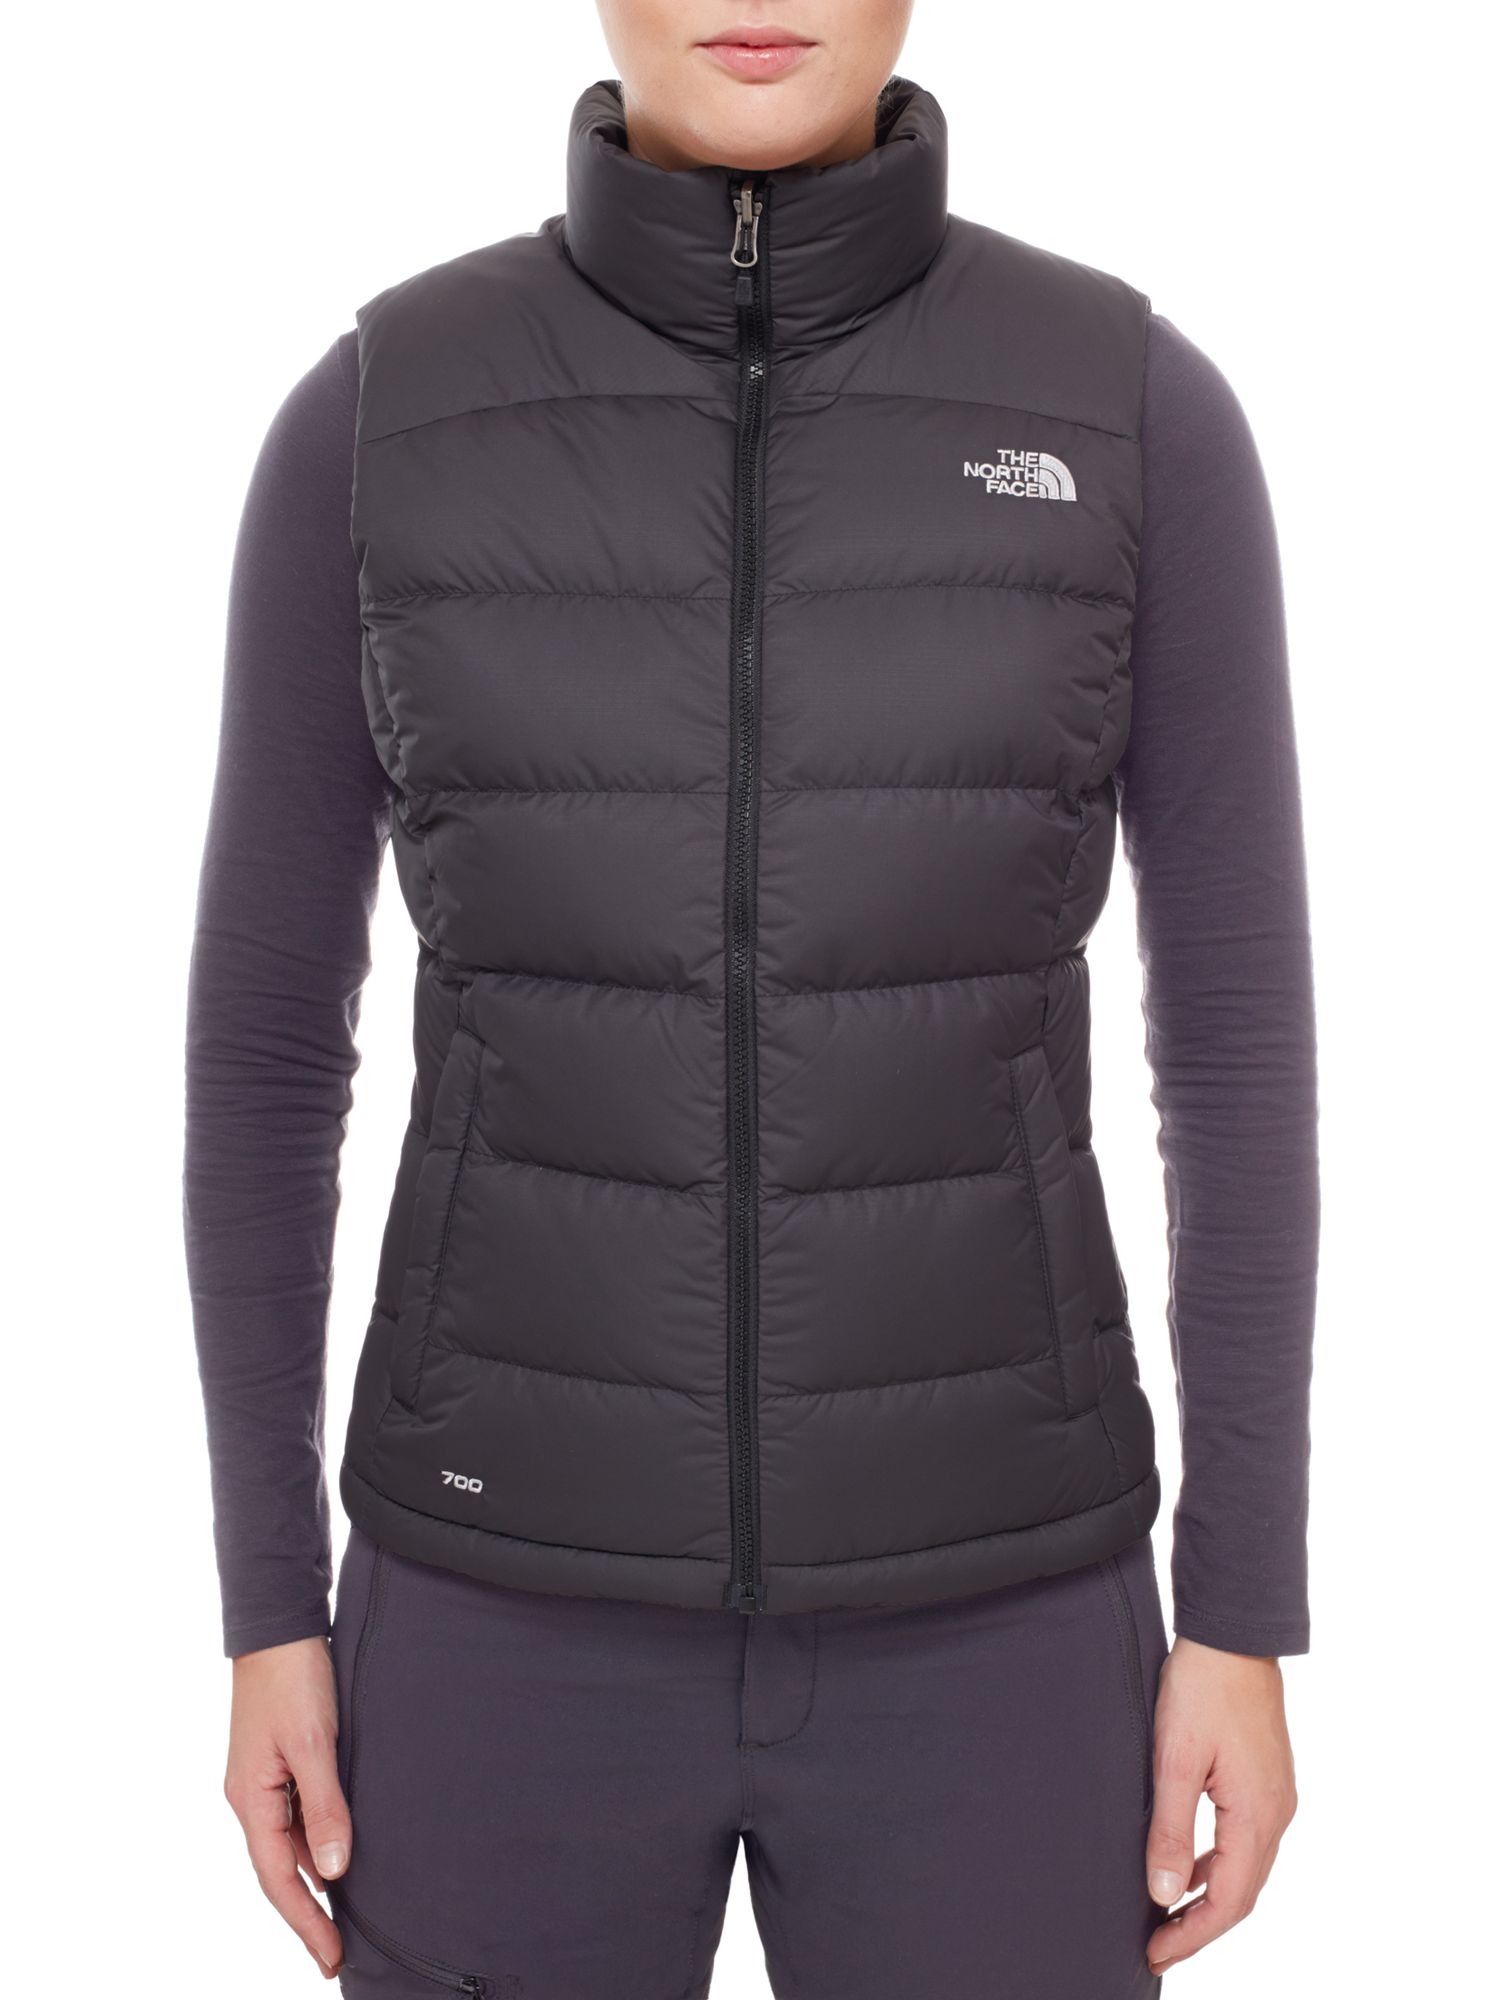 north face gilet womens sale